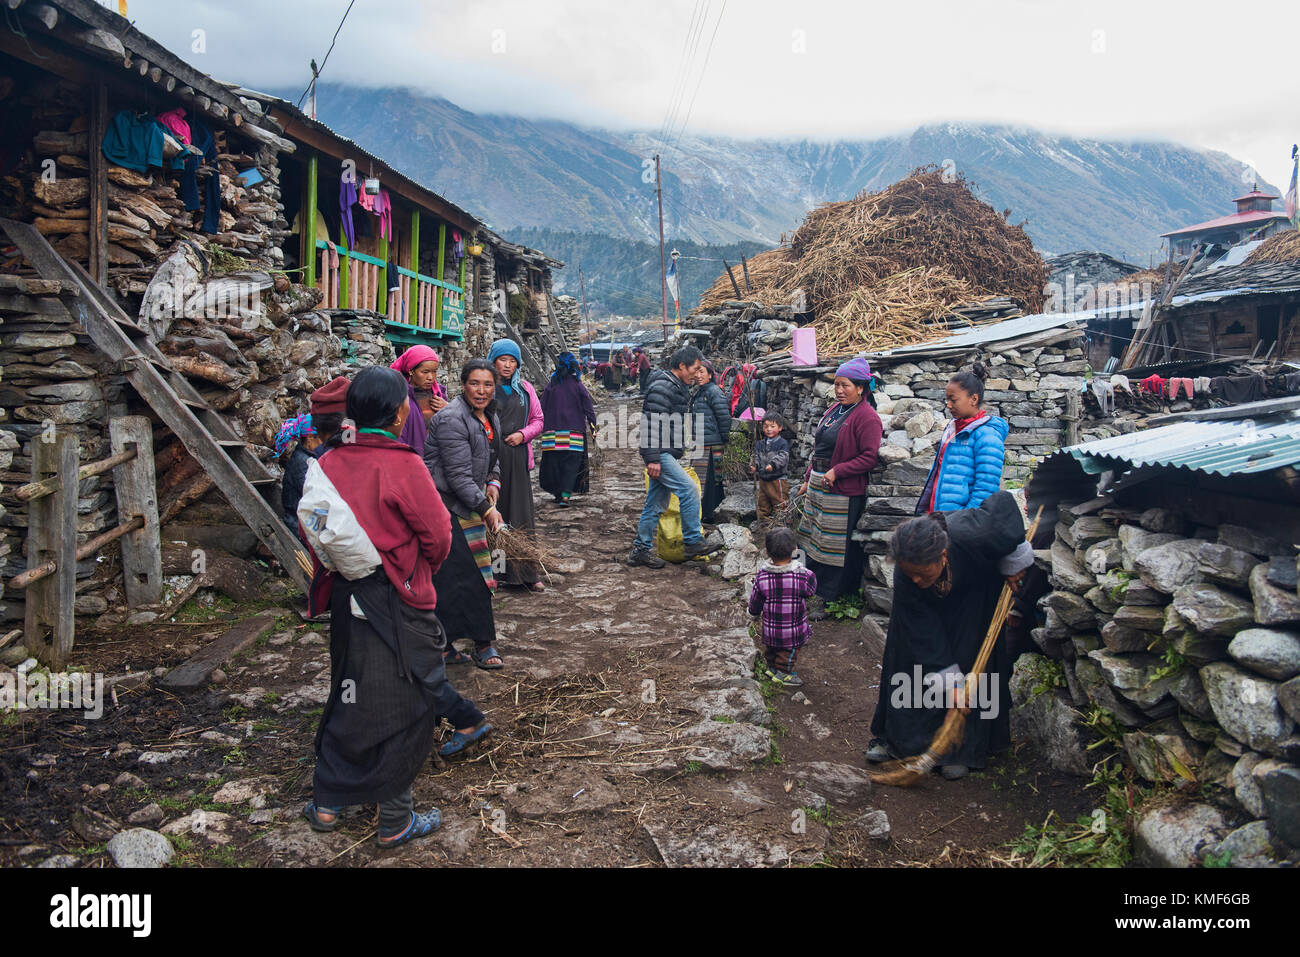 Villagers in the old village of Samagaon, a Tibetan area in the Manaslu region, Nepal Stock Photo